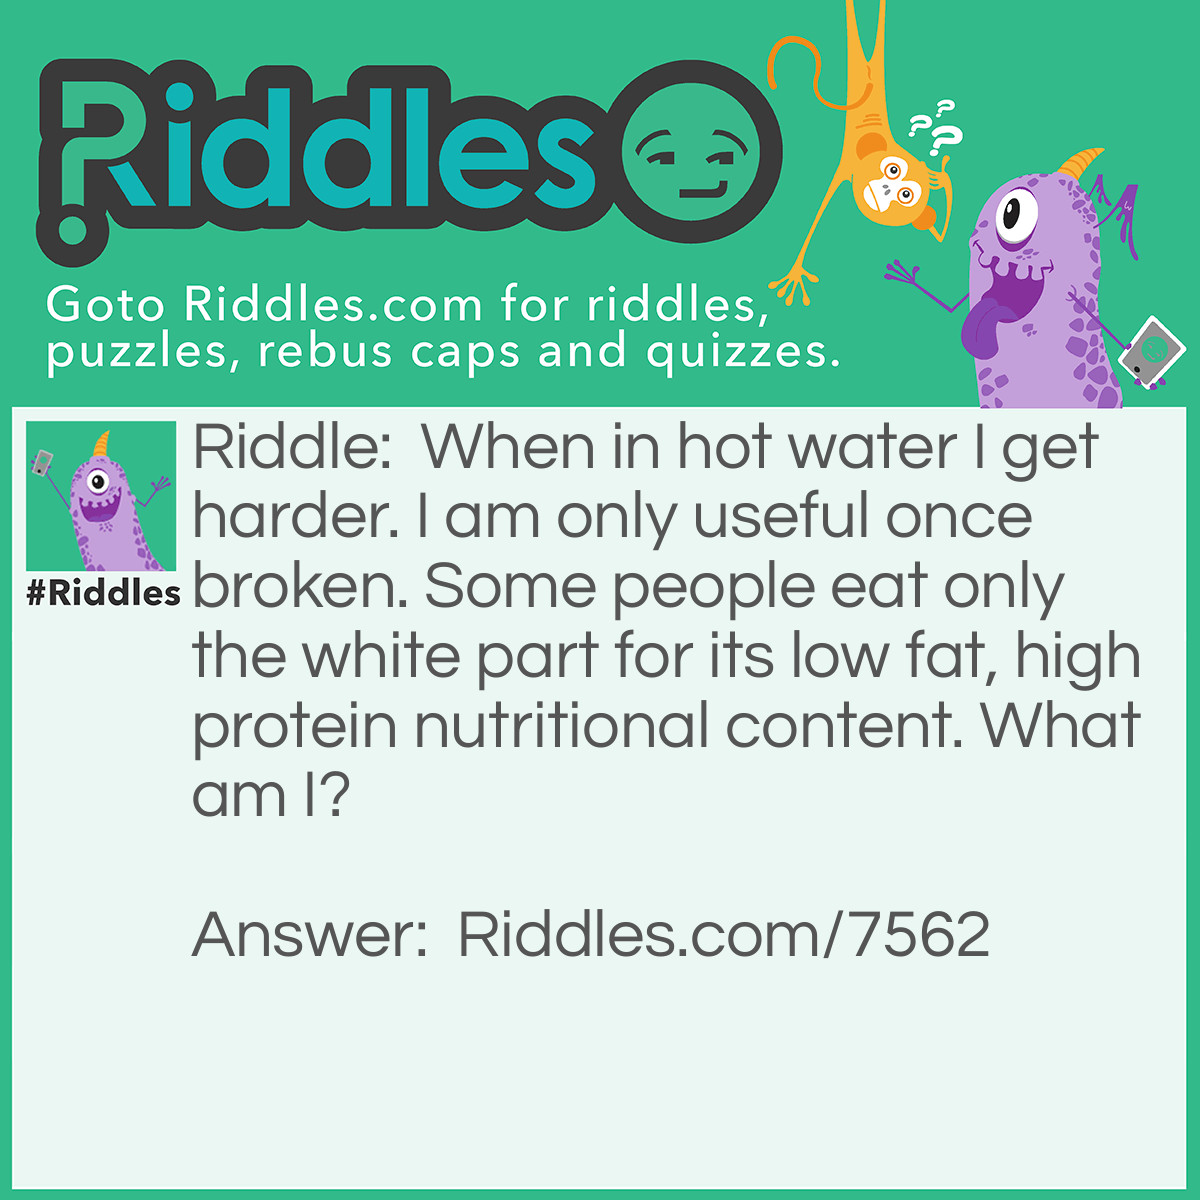 Riddle: When in hot water I get harder. I am only useful once broken. Some people eat only the white part for its low fat, high protein nutritional content. What am I? Answer: I am an egg.